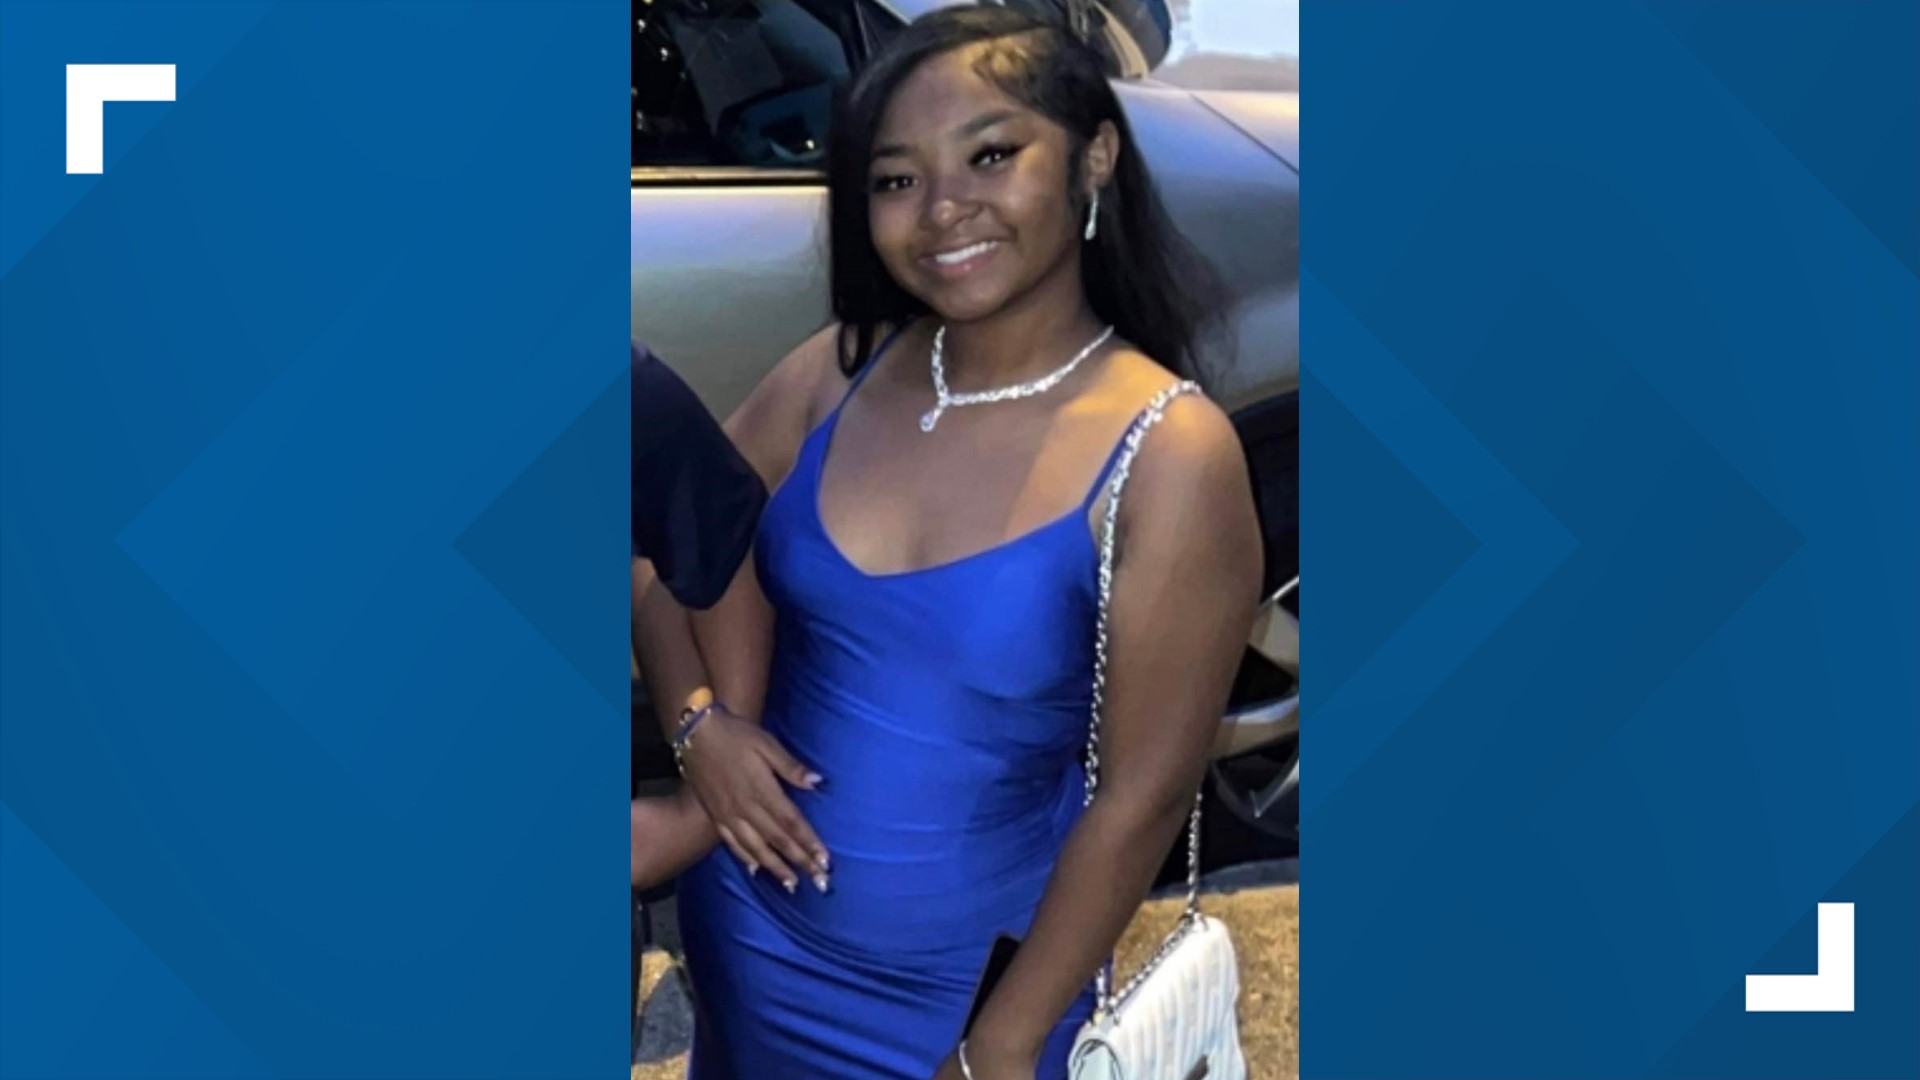 Columbus police identified the 15-year-old girl as  Lovely Kendricks, a student at East High School,